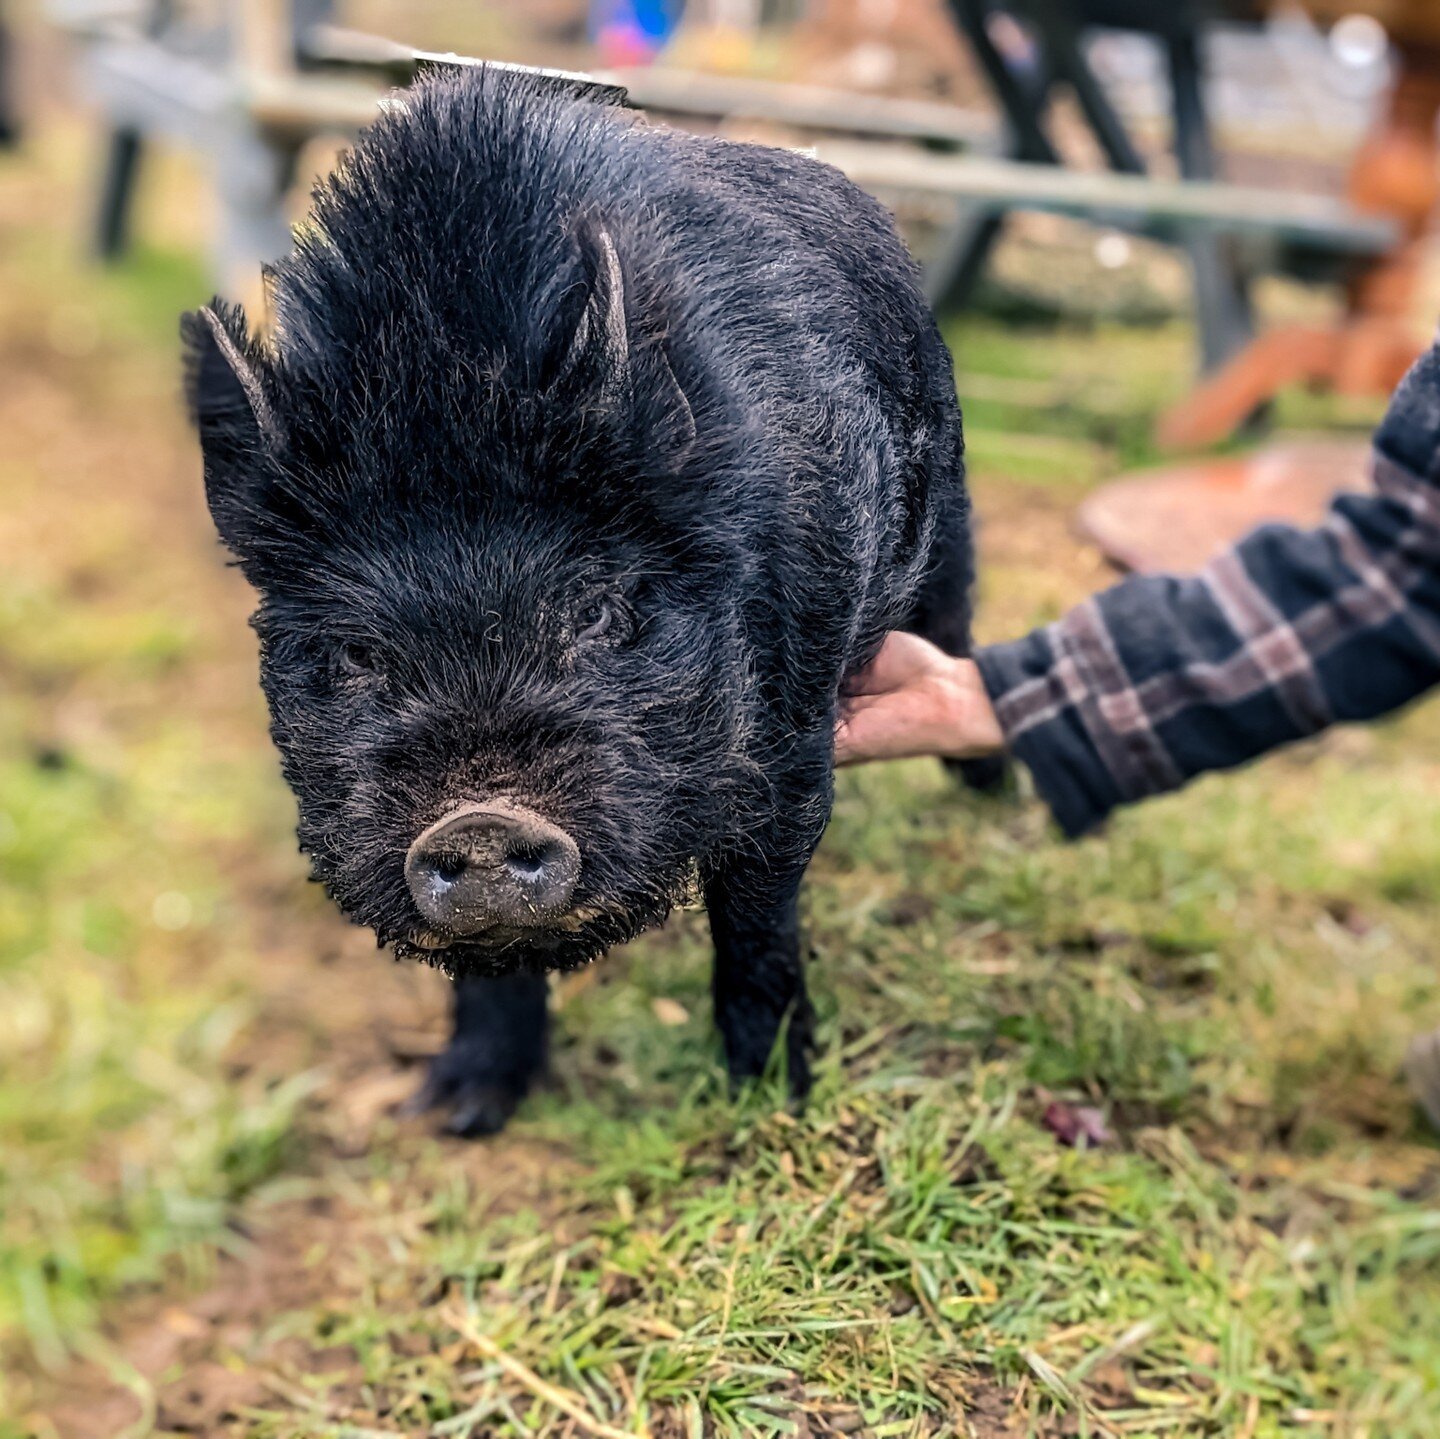 It's tummy rub Tuesday! Here's Uncle Sunlight about to flop over⁠
⁠
⁠
#farmsanctuary #animalsanctuary #rescue #friendsnotfood #herewithusnotforus #govegan #goveg #vegan #veganfortheanimals #animalsofinstagram #someonenotsomething #whidbeyisland⁠
#pig